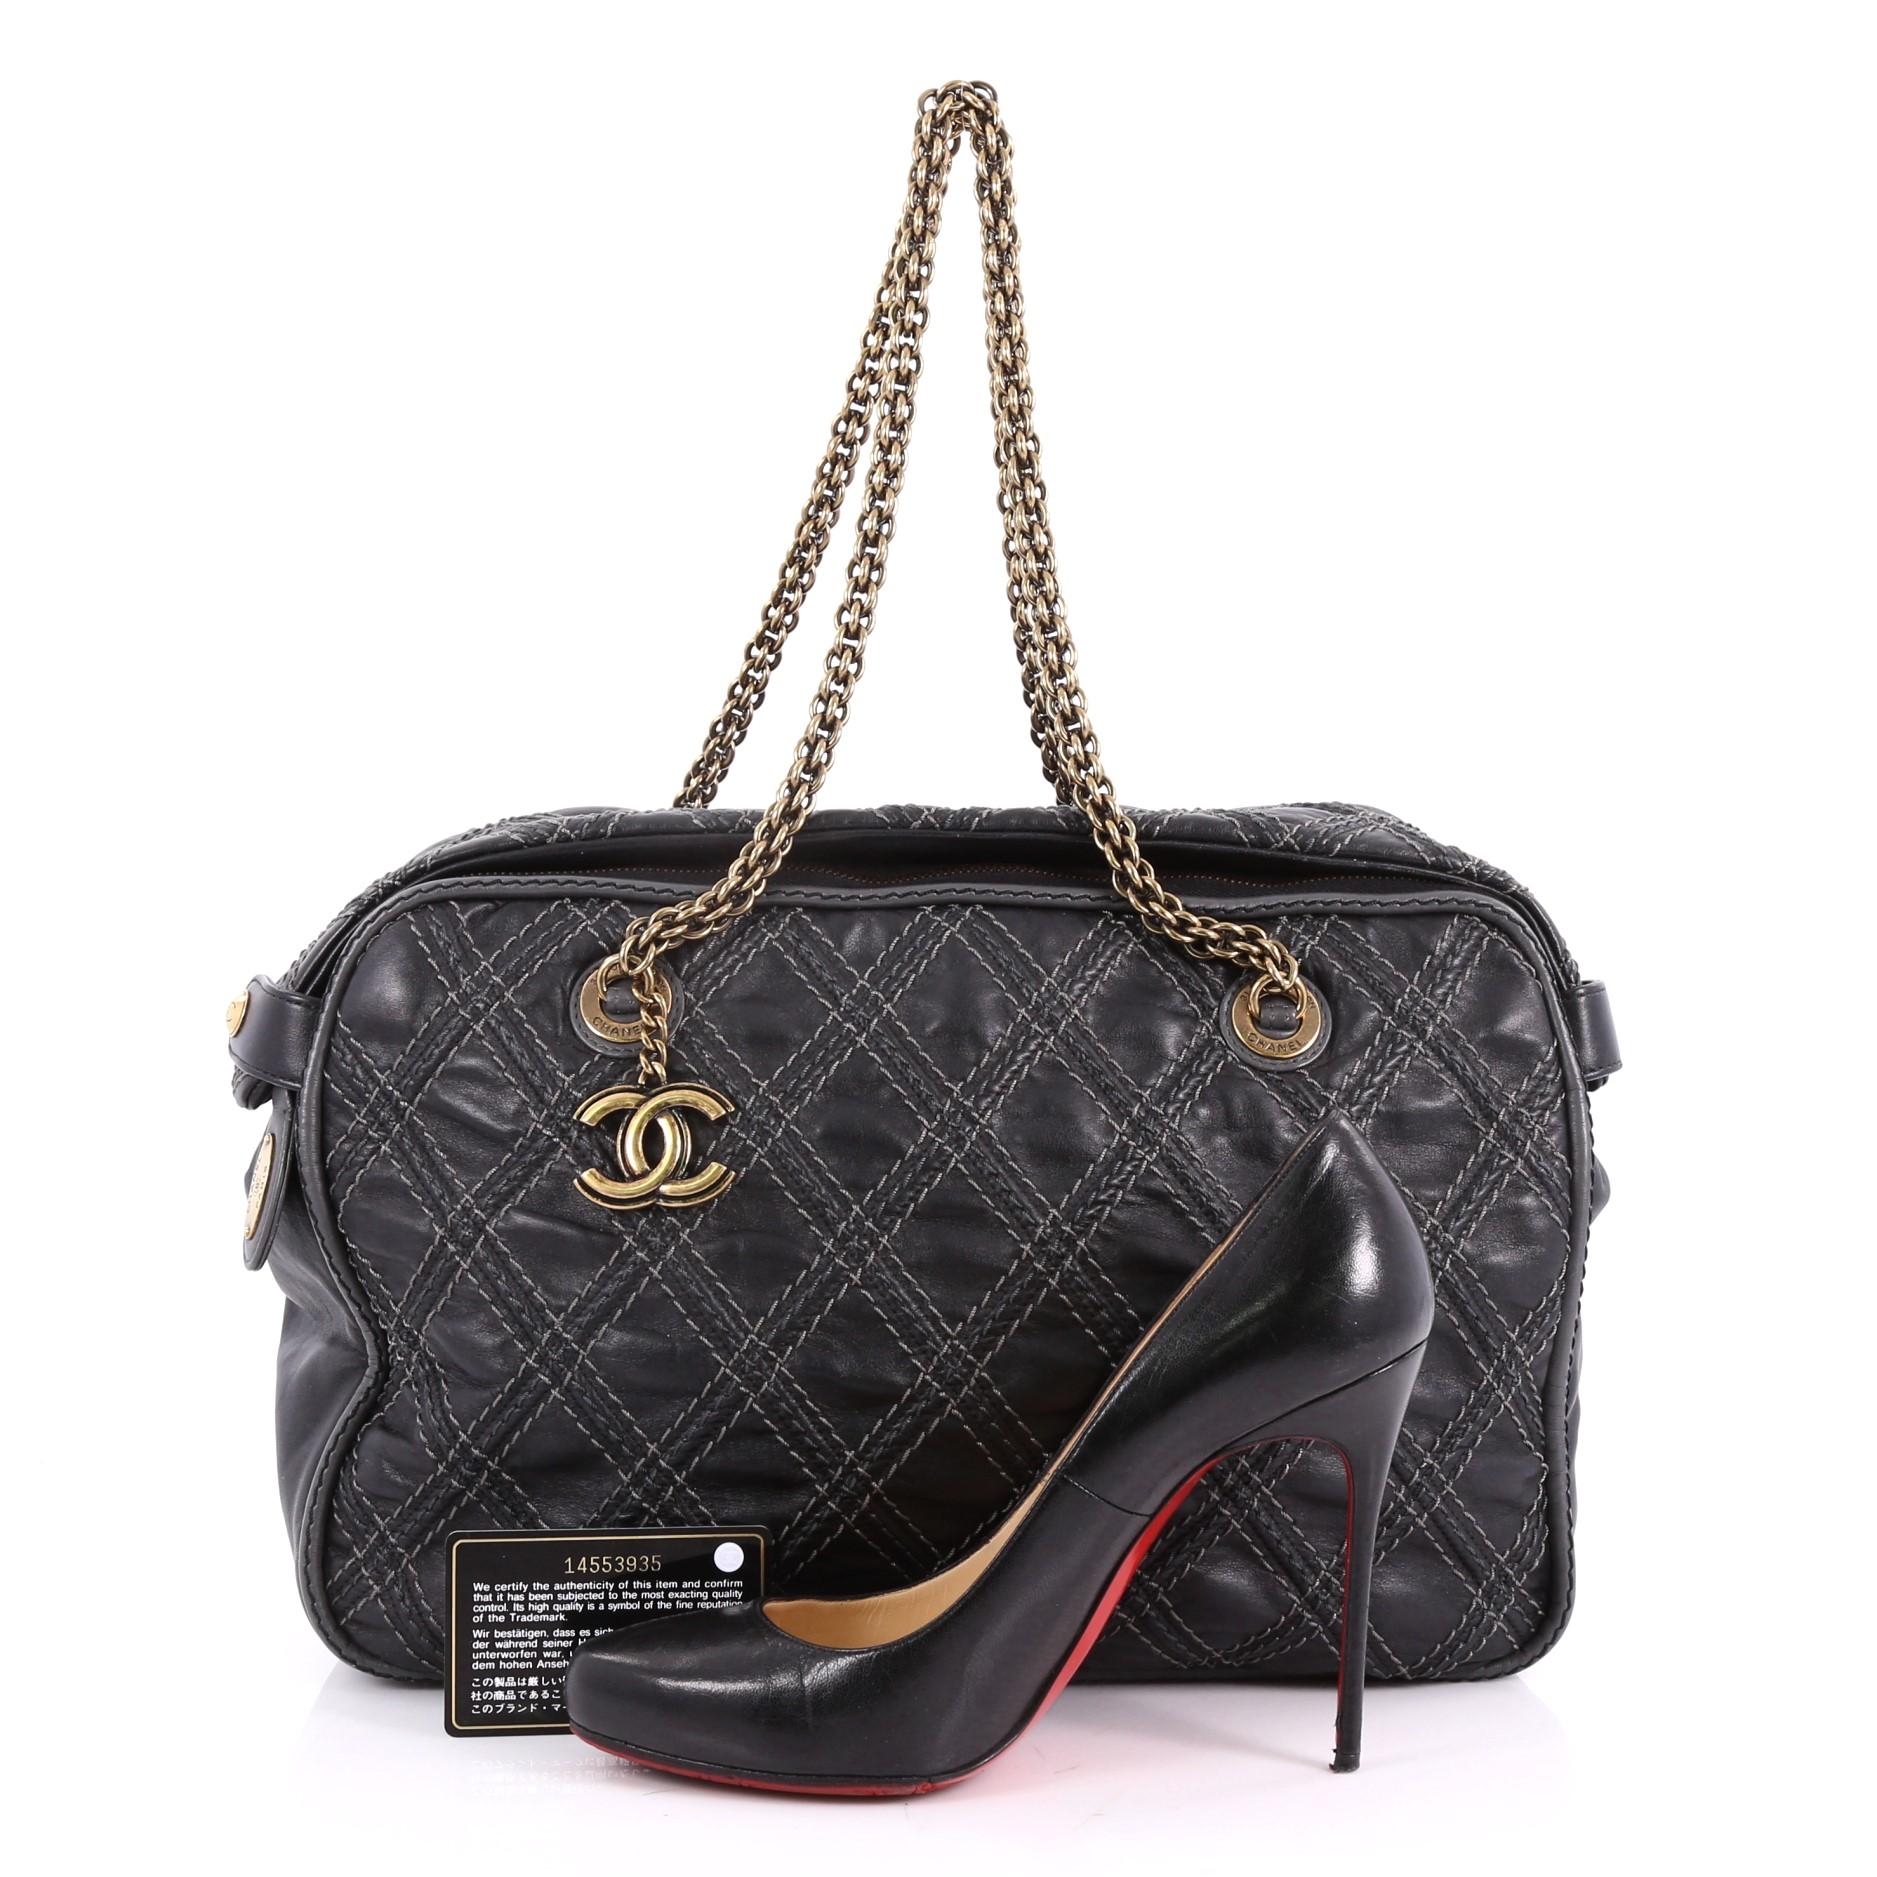 This authentic Chanel Triptych Tote Quilted Calfskin is a stylish and unique bag. Crafted in black quilted calfskin leather, this bag features dual chain link straps and aged gold-tone hardware accents. Its zip closure opens to a gray satin-lined